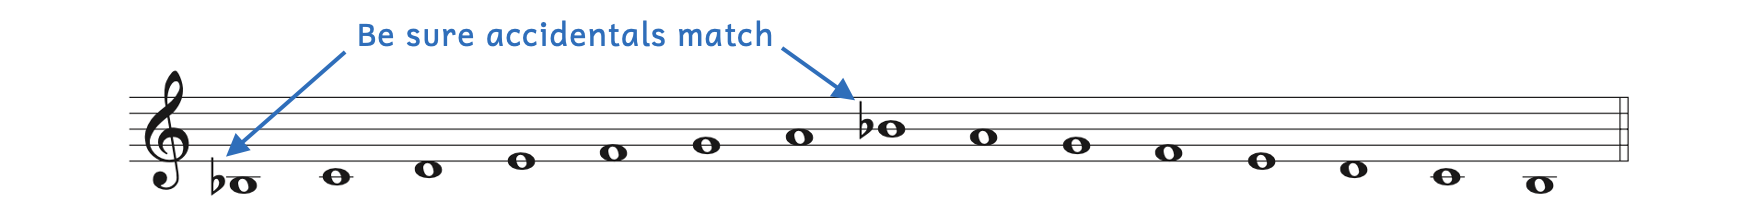 Ascending and descending diatonic scale beginning on B-flat3. There must also be an accidental for B-flat4. Be sure accidentals match for the first and last notes.